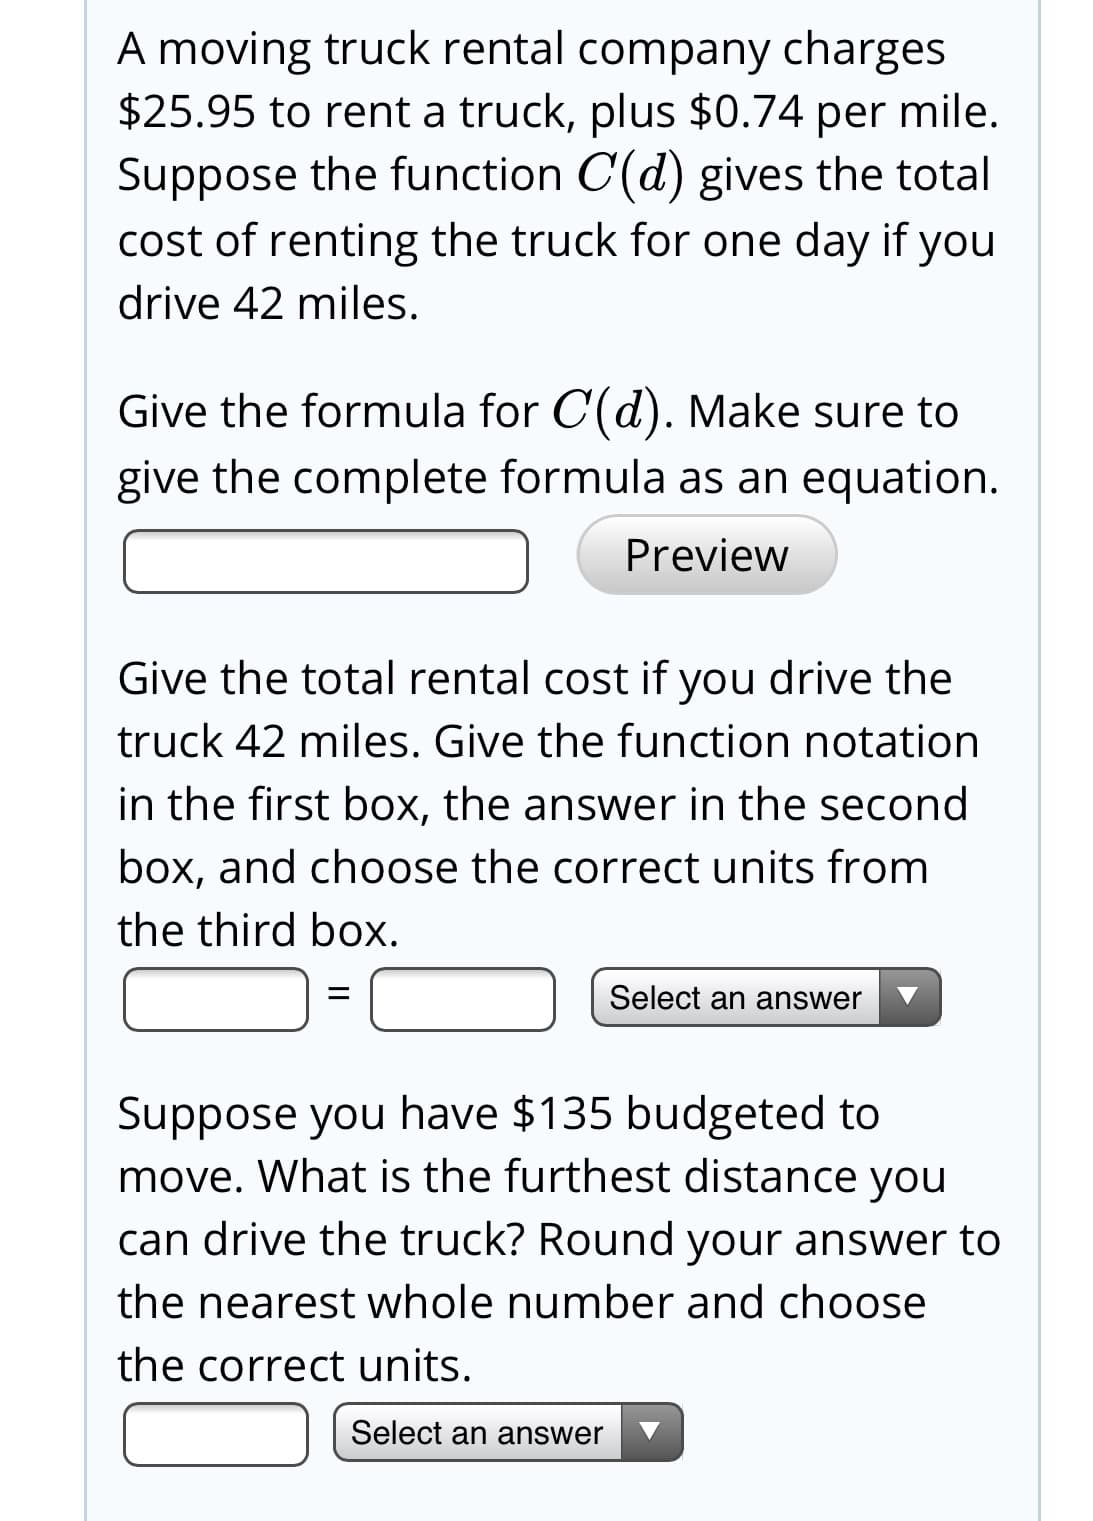 A moving truck rental company charges
$25.95 to rent a truck, plus $0.74 per mile.
Suppose the function C(d) gives the total
cost of renting the truck for one day if you
drive 42 miles.
Give the formula for C(d). Make sure to
give the complete formula as an equation.
Preview
Give the total rental cost if you drive the
truck 42 miles. Give the function notation
in the first box, the answer in the second
box, and choose the correct units from
the third box.
Select an answer
Suppose you have $135 budgeted to
move. What is the furthest distance you
can drive the truck? Round your answer to
the nearest whole number and choose
the correct units.
Select an answer
